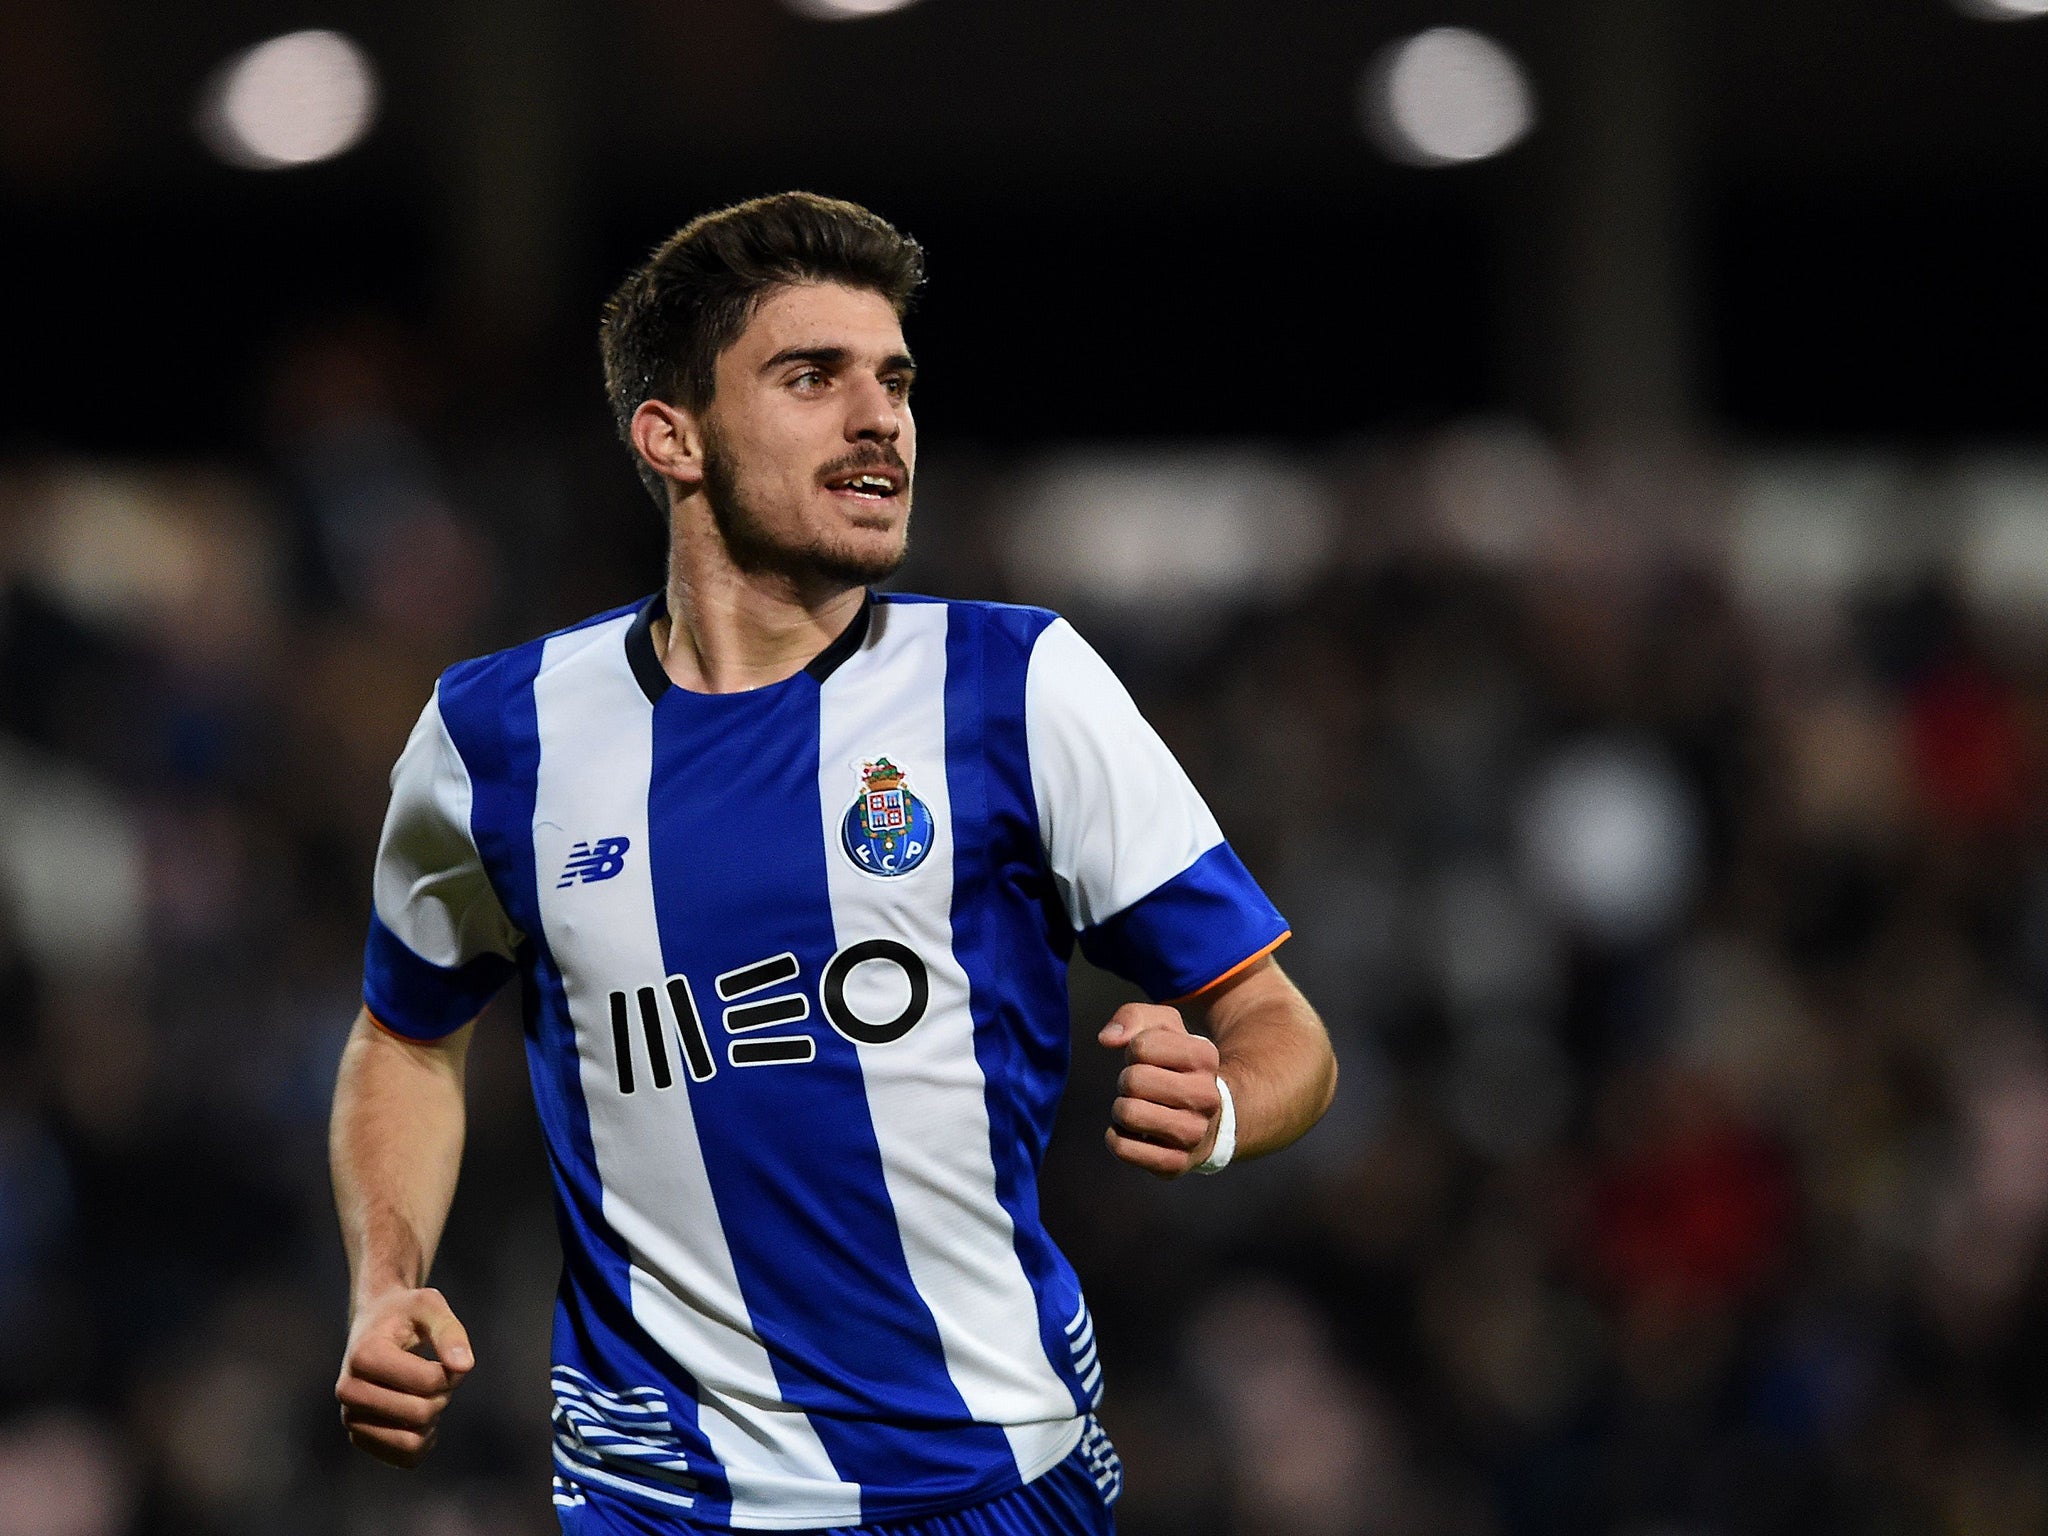 Ruben Neves is talented but will have to adapt quickly to English football's second tier